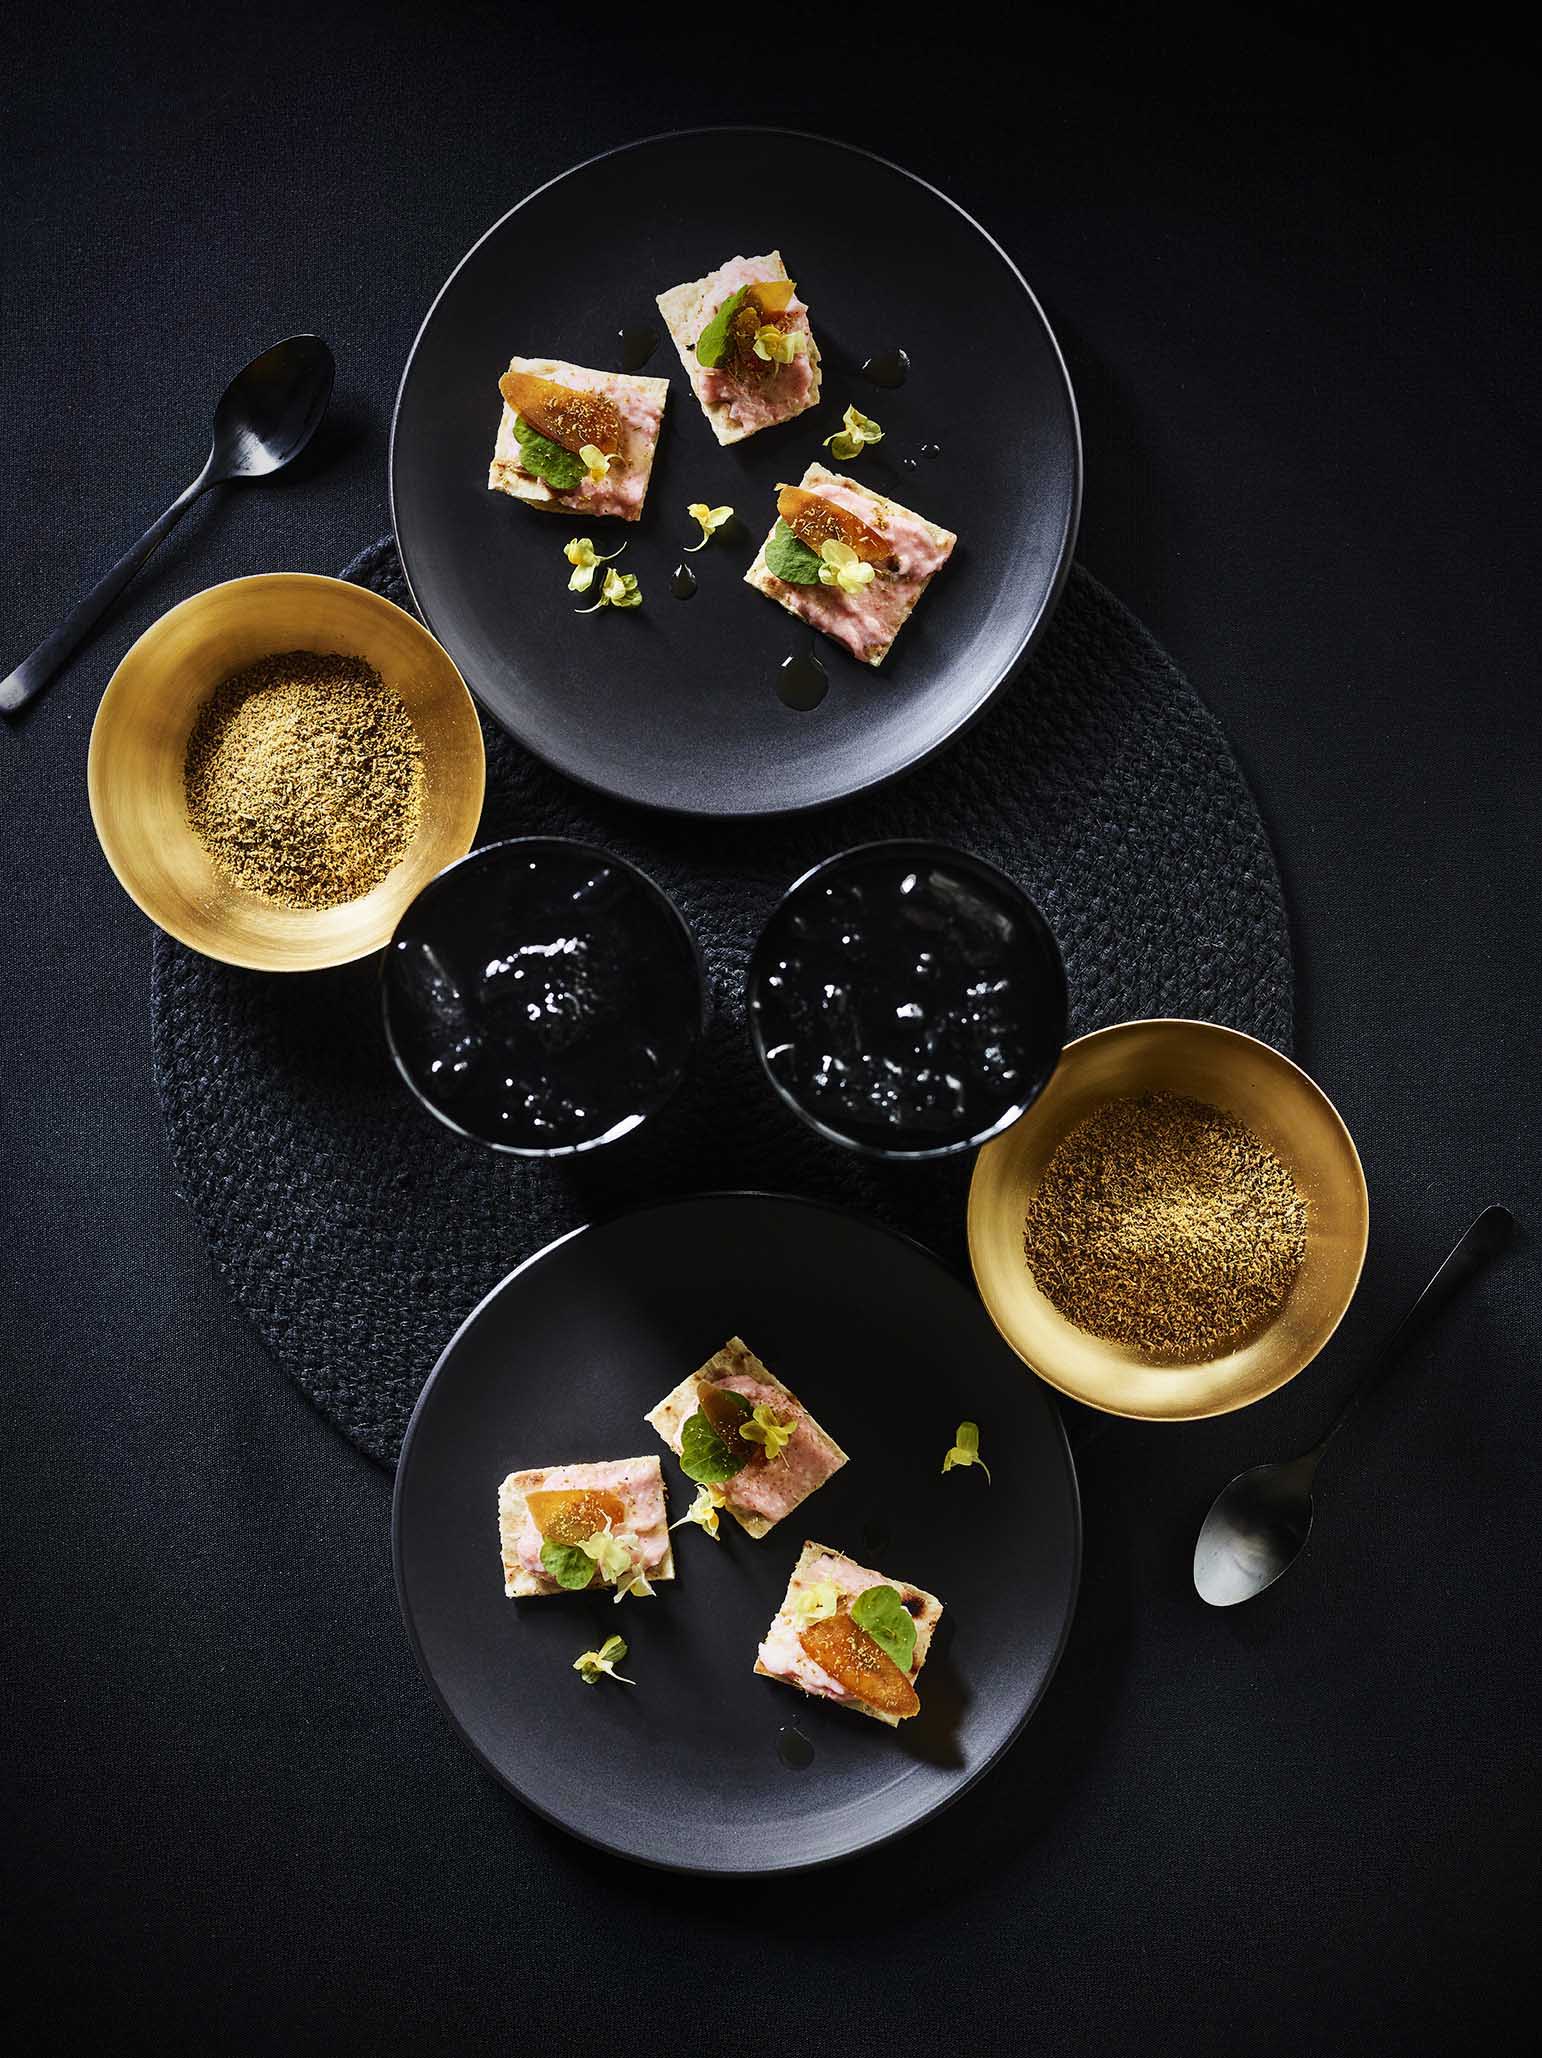 Gastronomy's hand made canapes presented on stylish black plates on table top